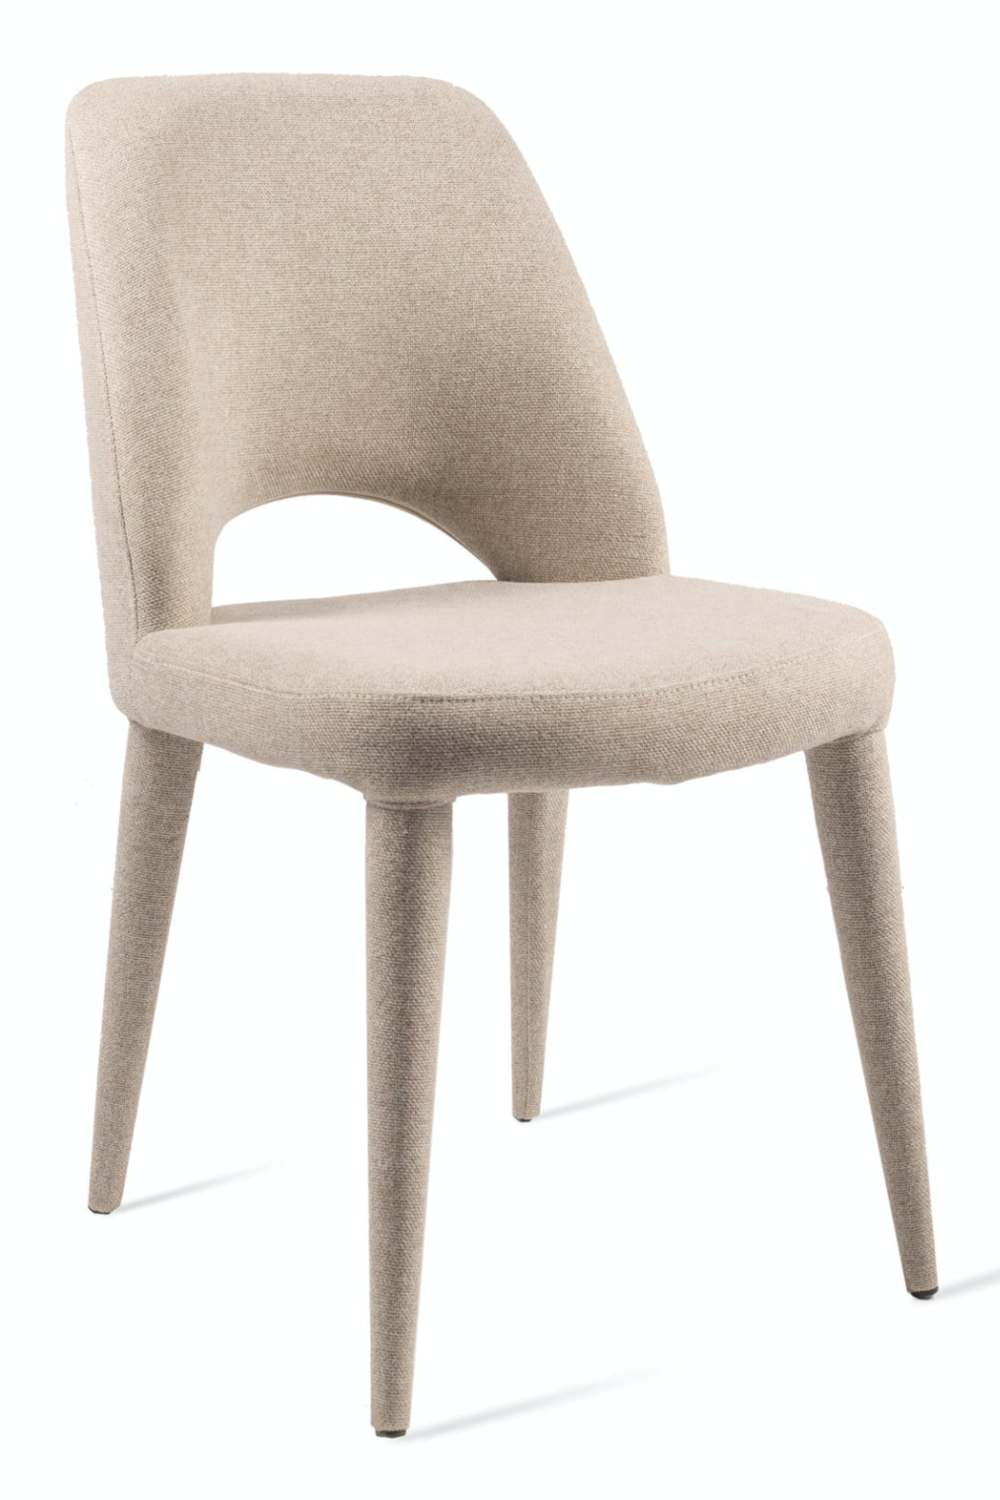 Beige Dining Chair | Pols Potten Holy | OROA.com